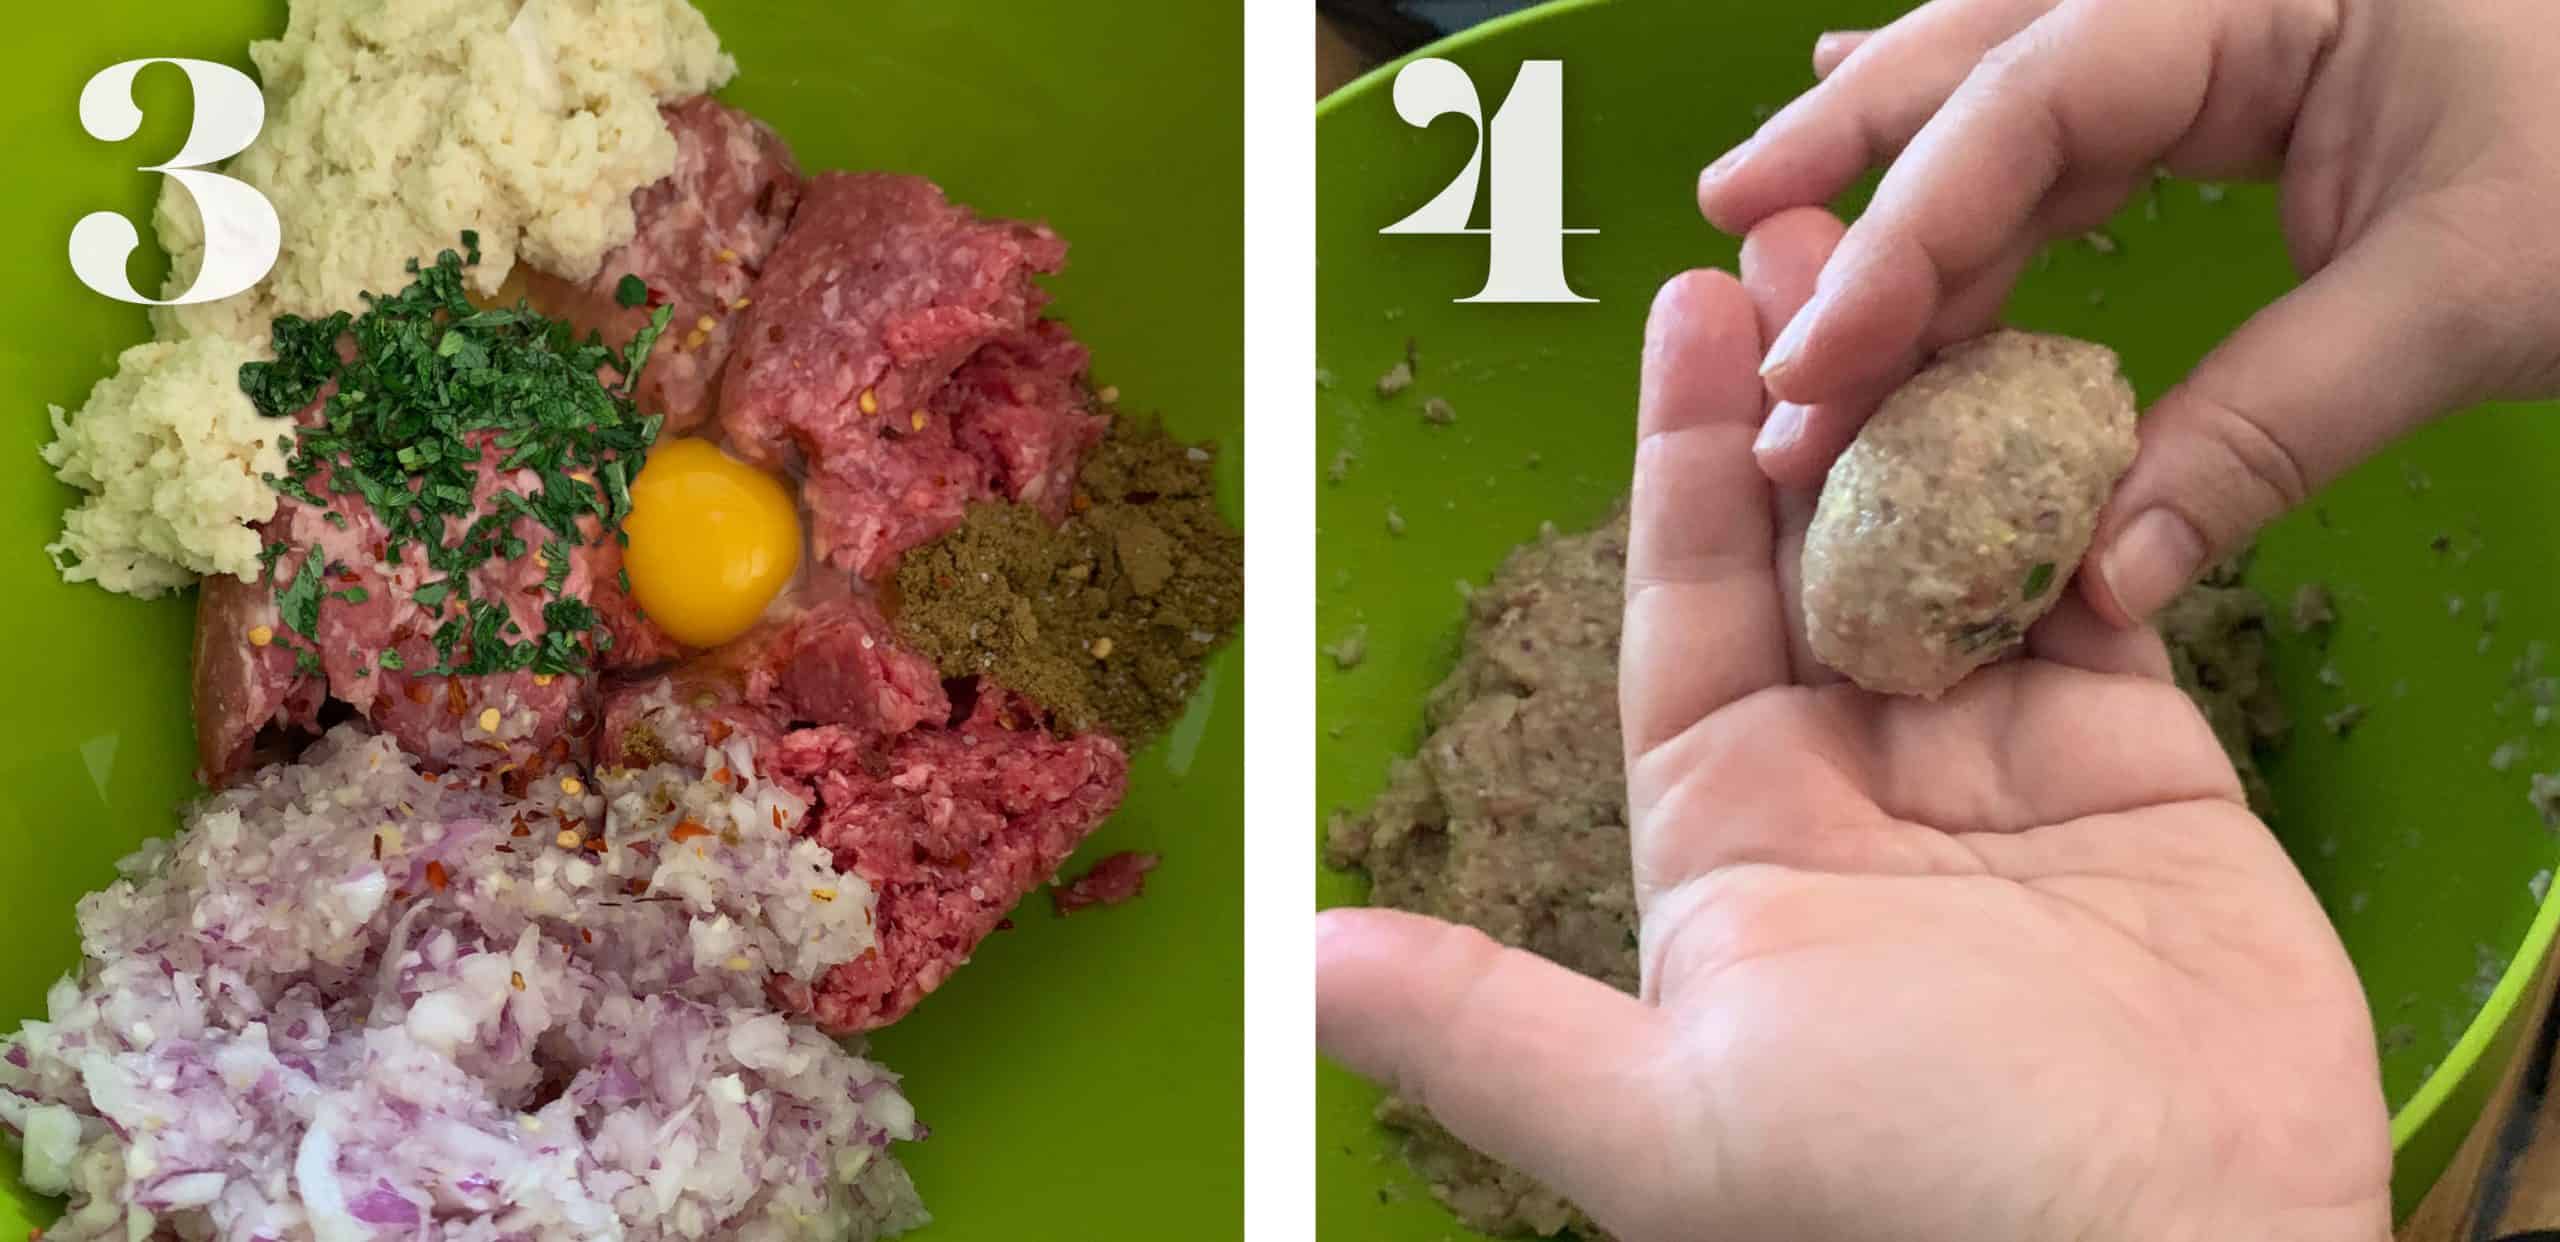 Image 3. Ingredients for cumin meatballs in a large green bowl. Image 4 2 hands forming a meatball over a green bowl.